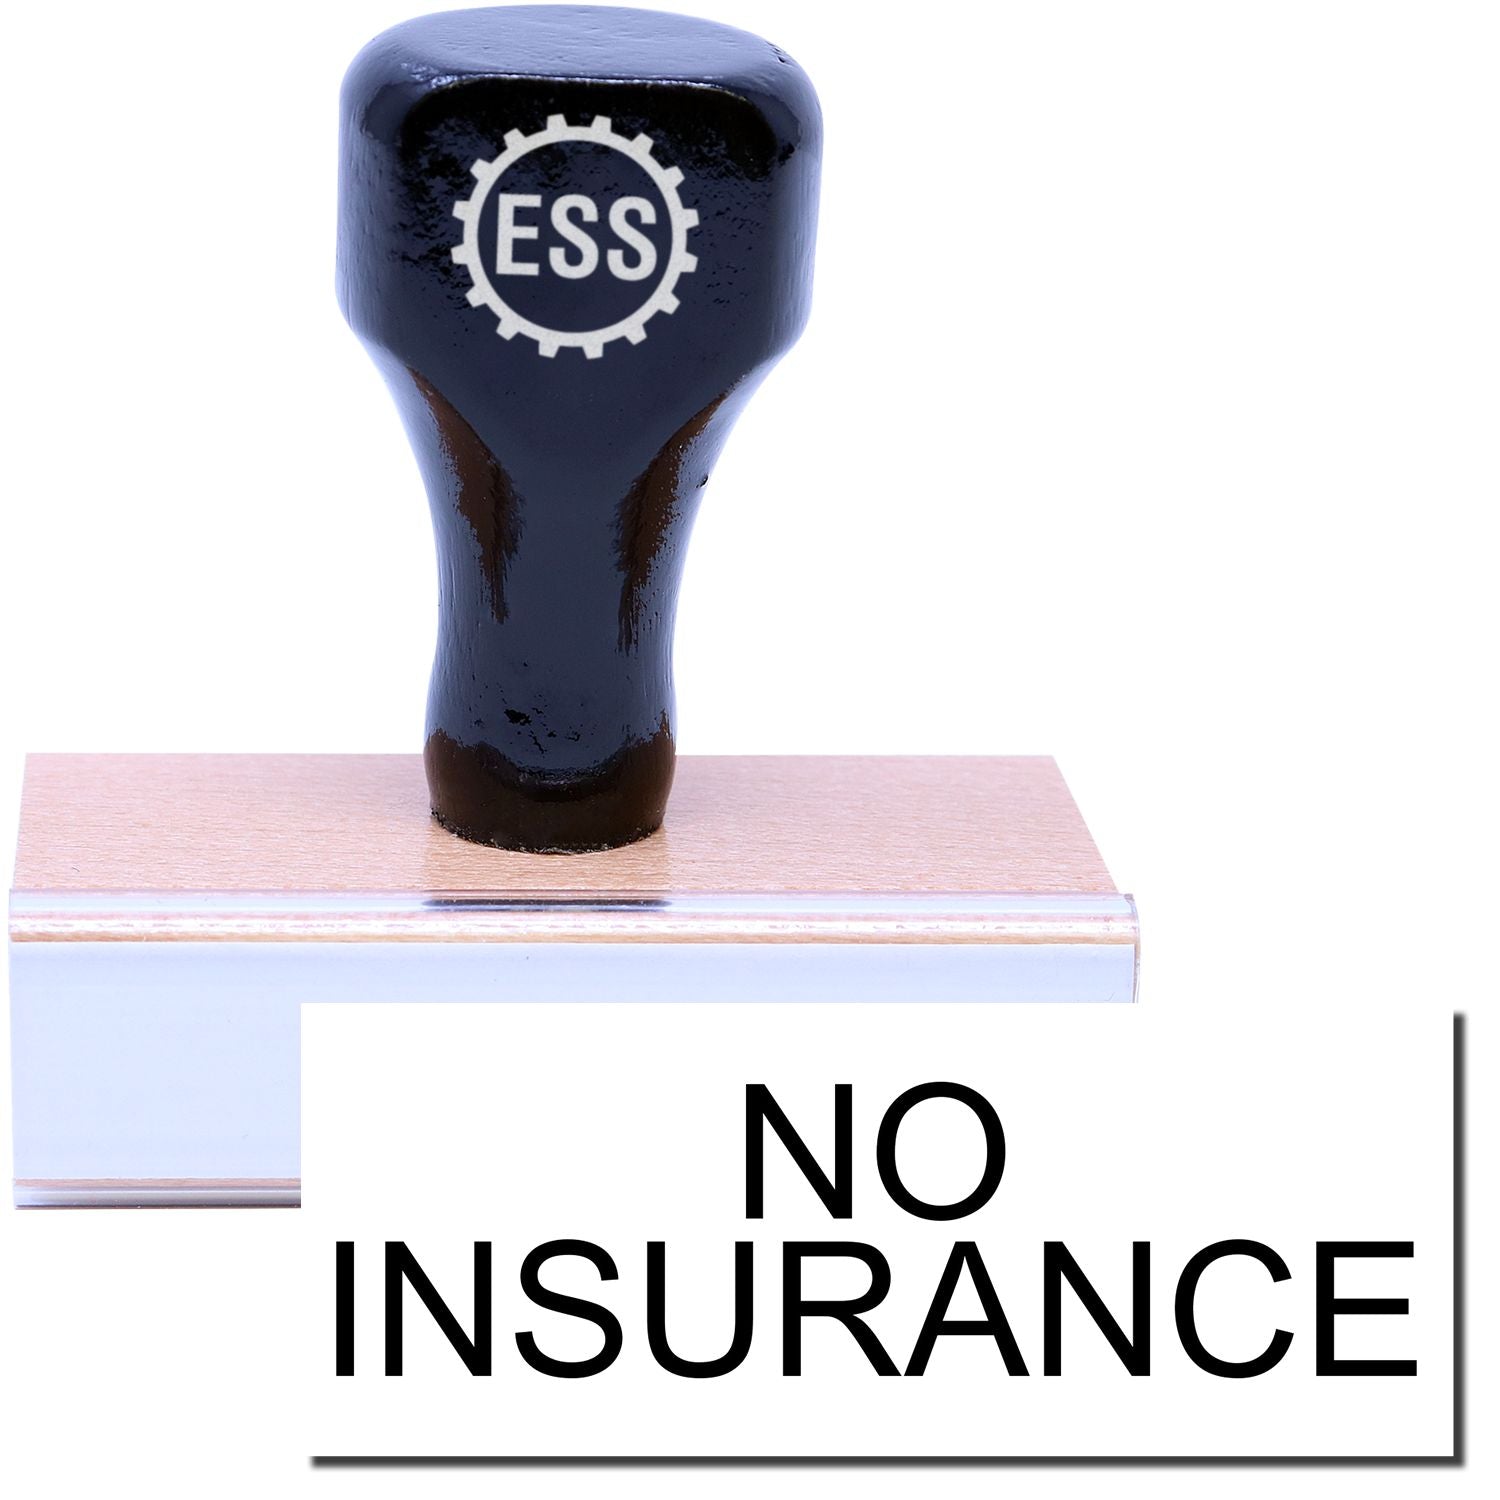 A stock office rubber stamp with a stamped image showing how the text "NO INSURANCE" in a large font is displayed after stamping.